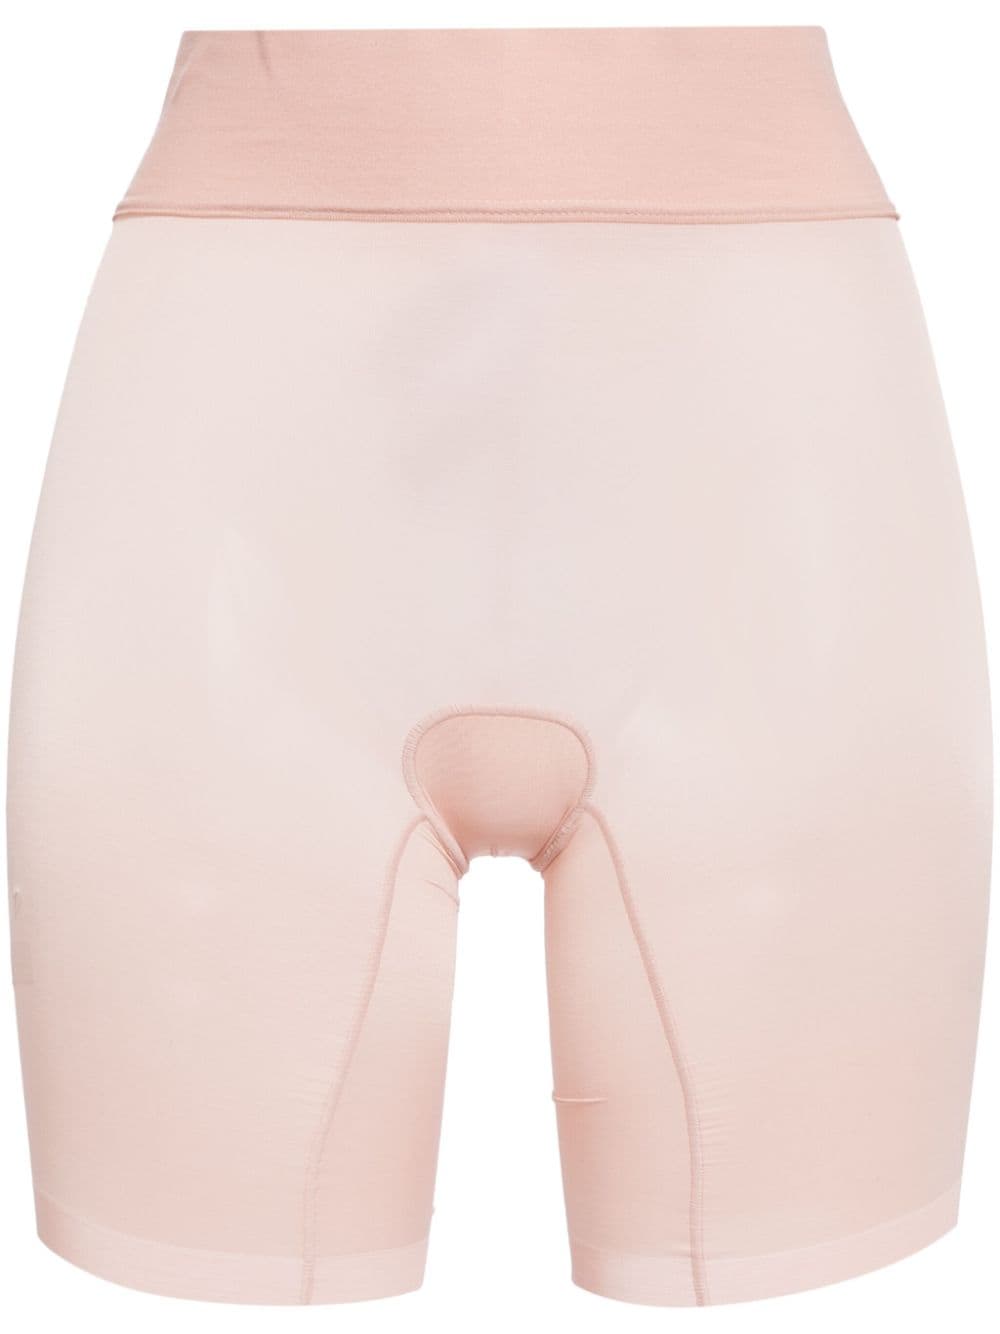 Wolford sheer touch control shorts - Pink